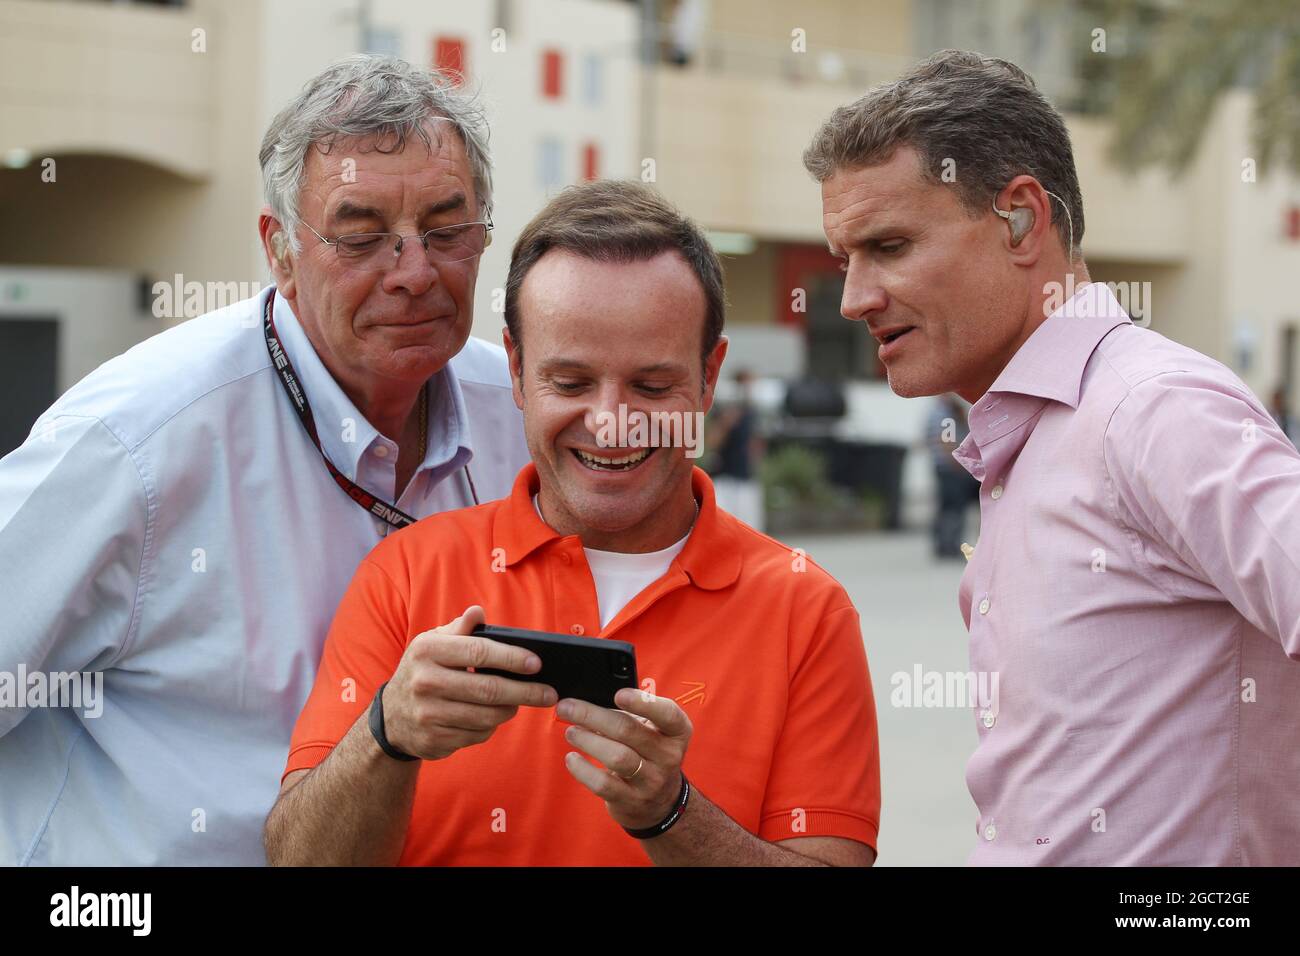 (L to R): Gary Anderson (IRE) BBC Sport Expert Analyst with Rubens Barrichello (BRA) and David Coulthard (GBR) Red Bull Racing and Scuderia Toro Advisor / BBC Television Commentator. Bahrain Grand Prix, Saturday 20th April 2013. Sakhir, Bahrain. Stock Photo